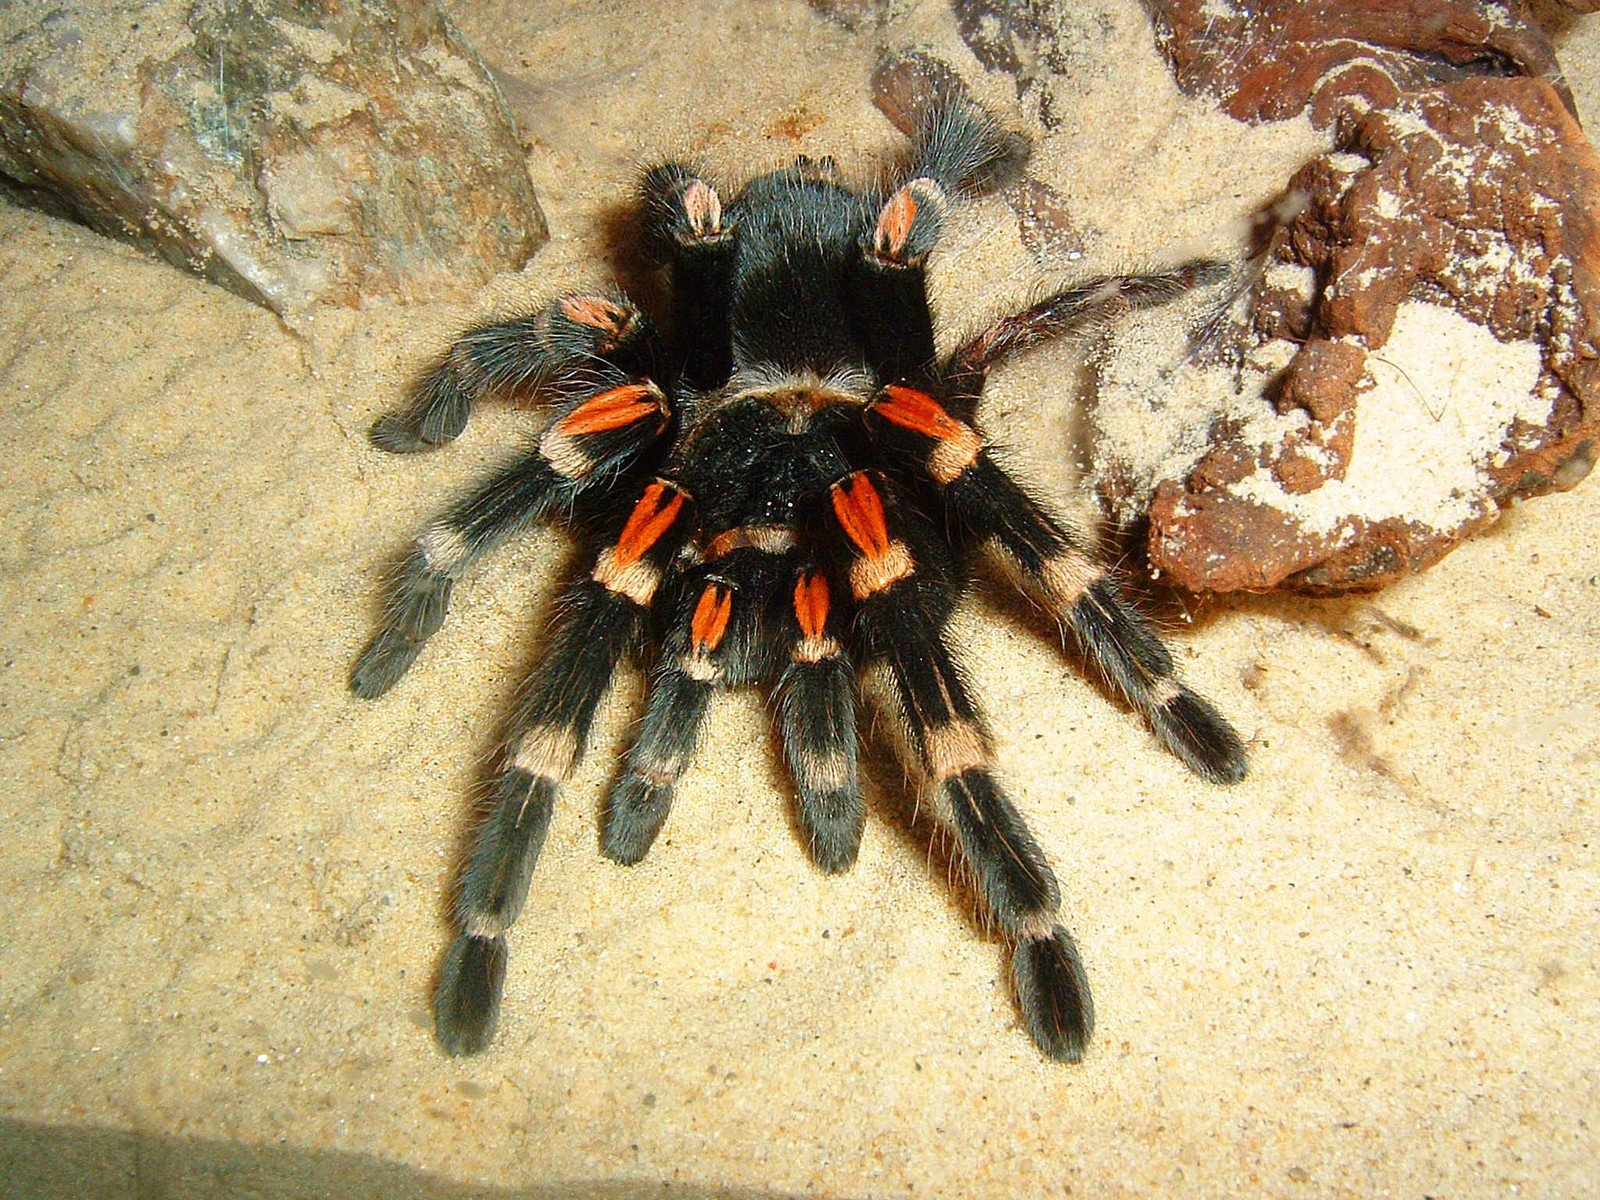 a black and orange spider standing on the sand